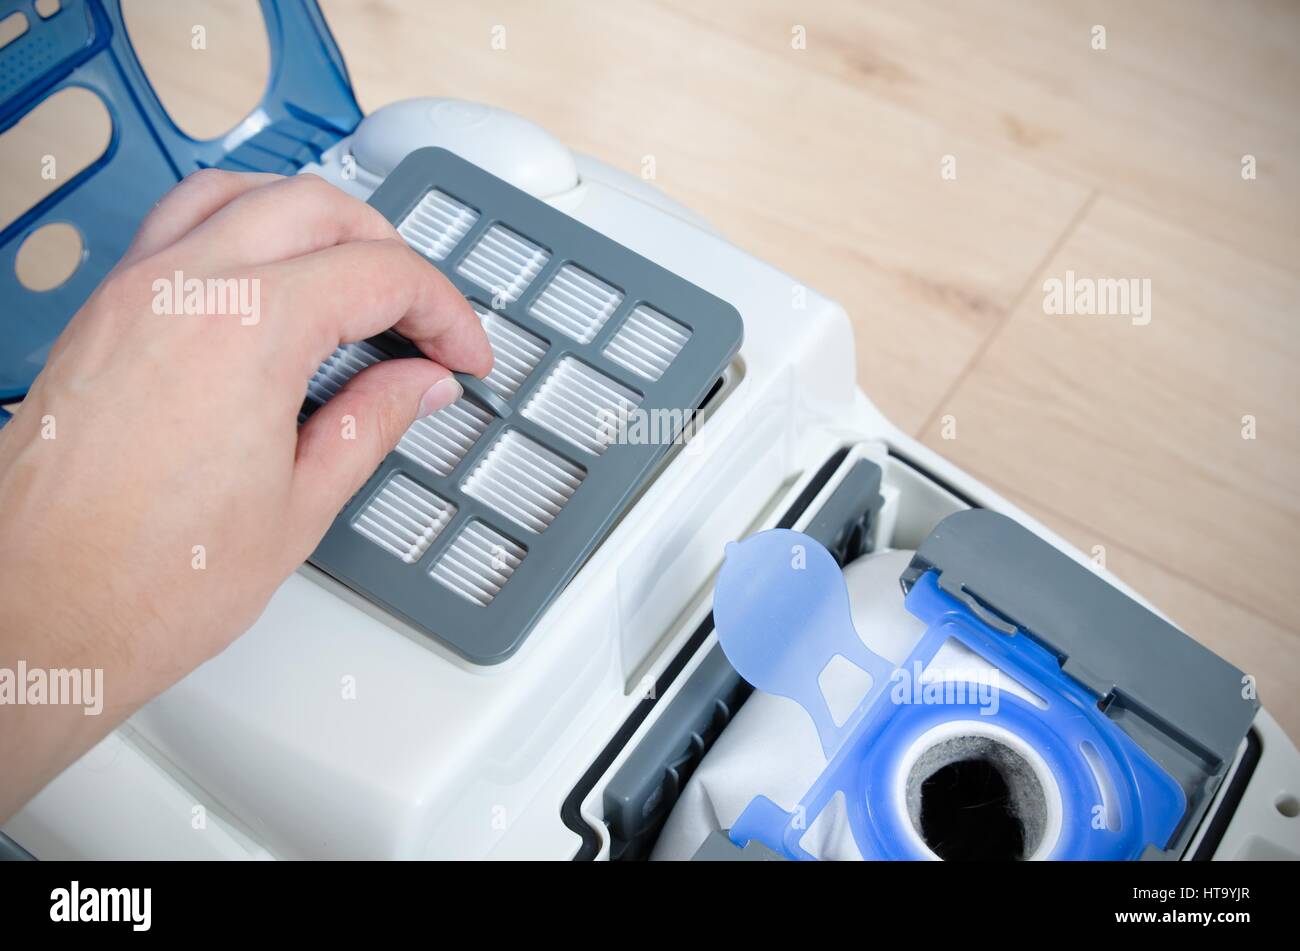 Hand replacing the air filter in a modern vacuum cleaner Stock Photo